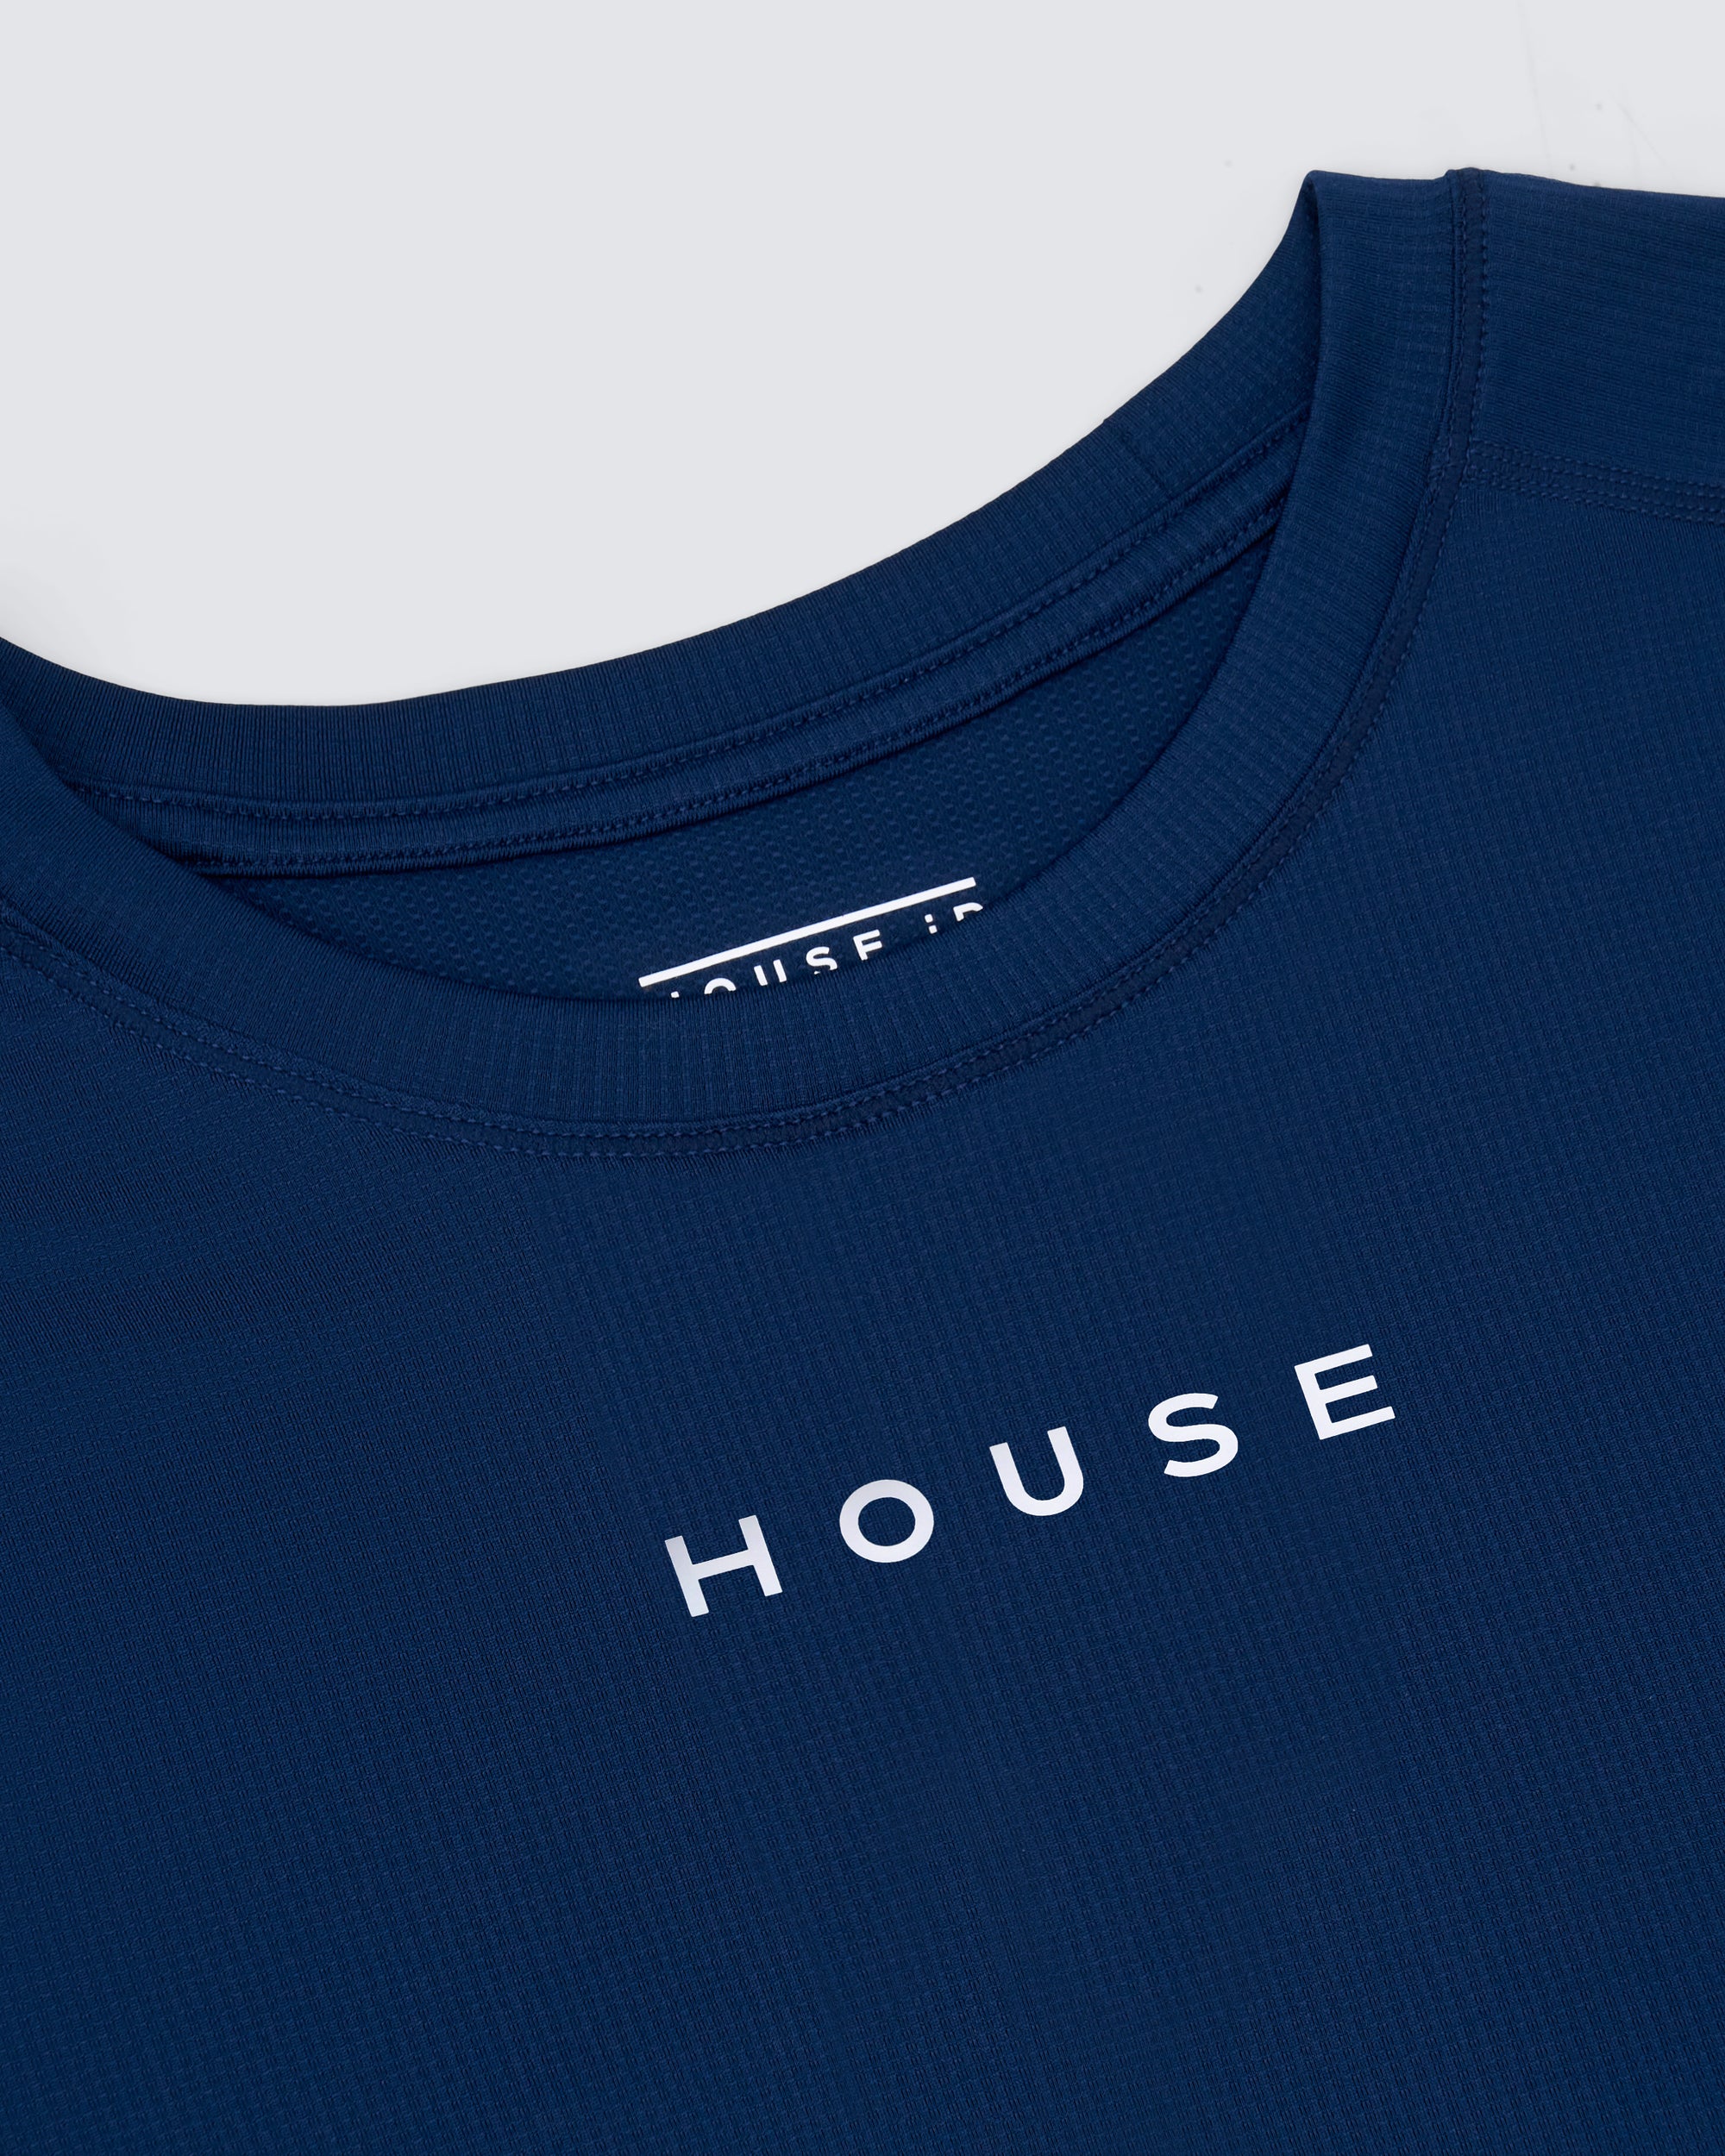 Mens athletic t-shirt in navy close up